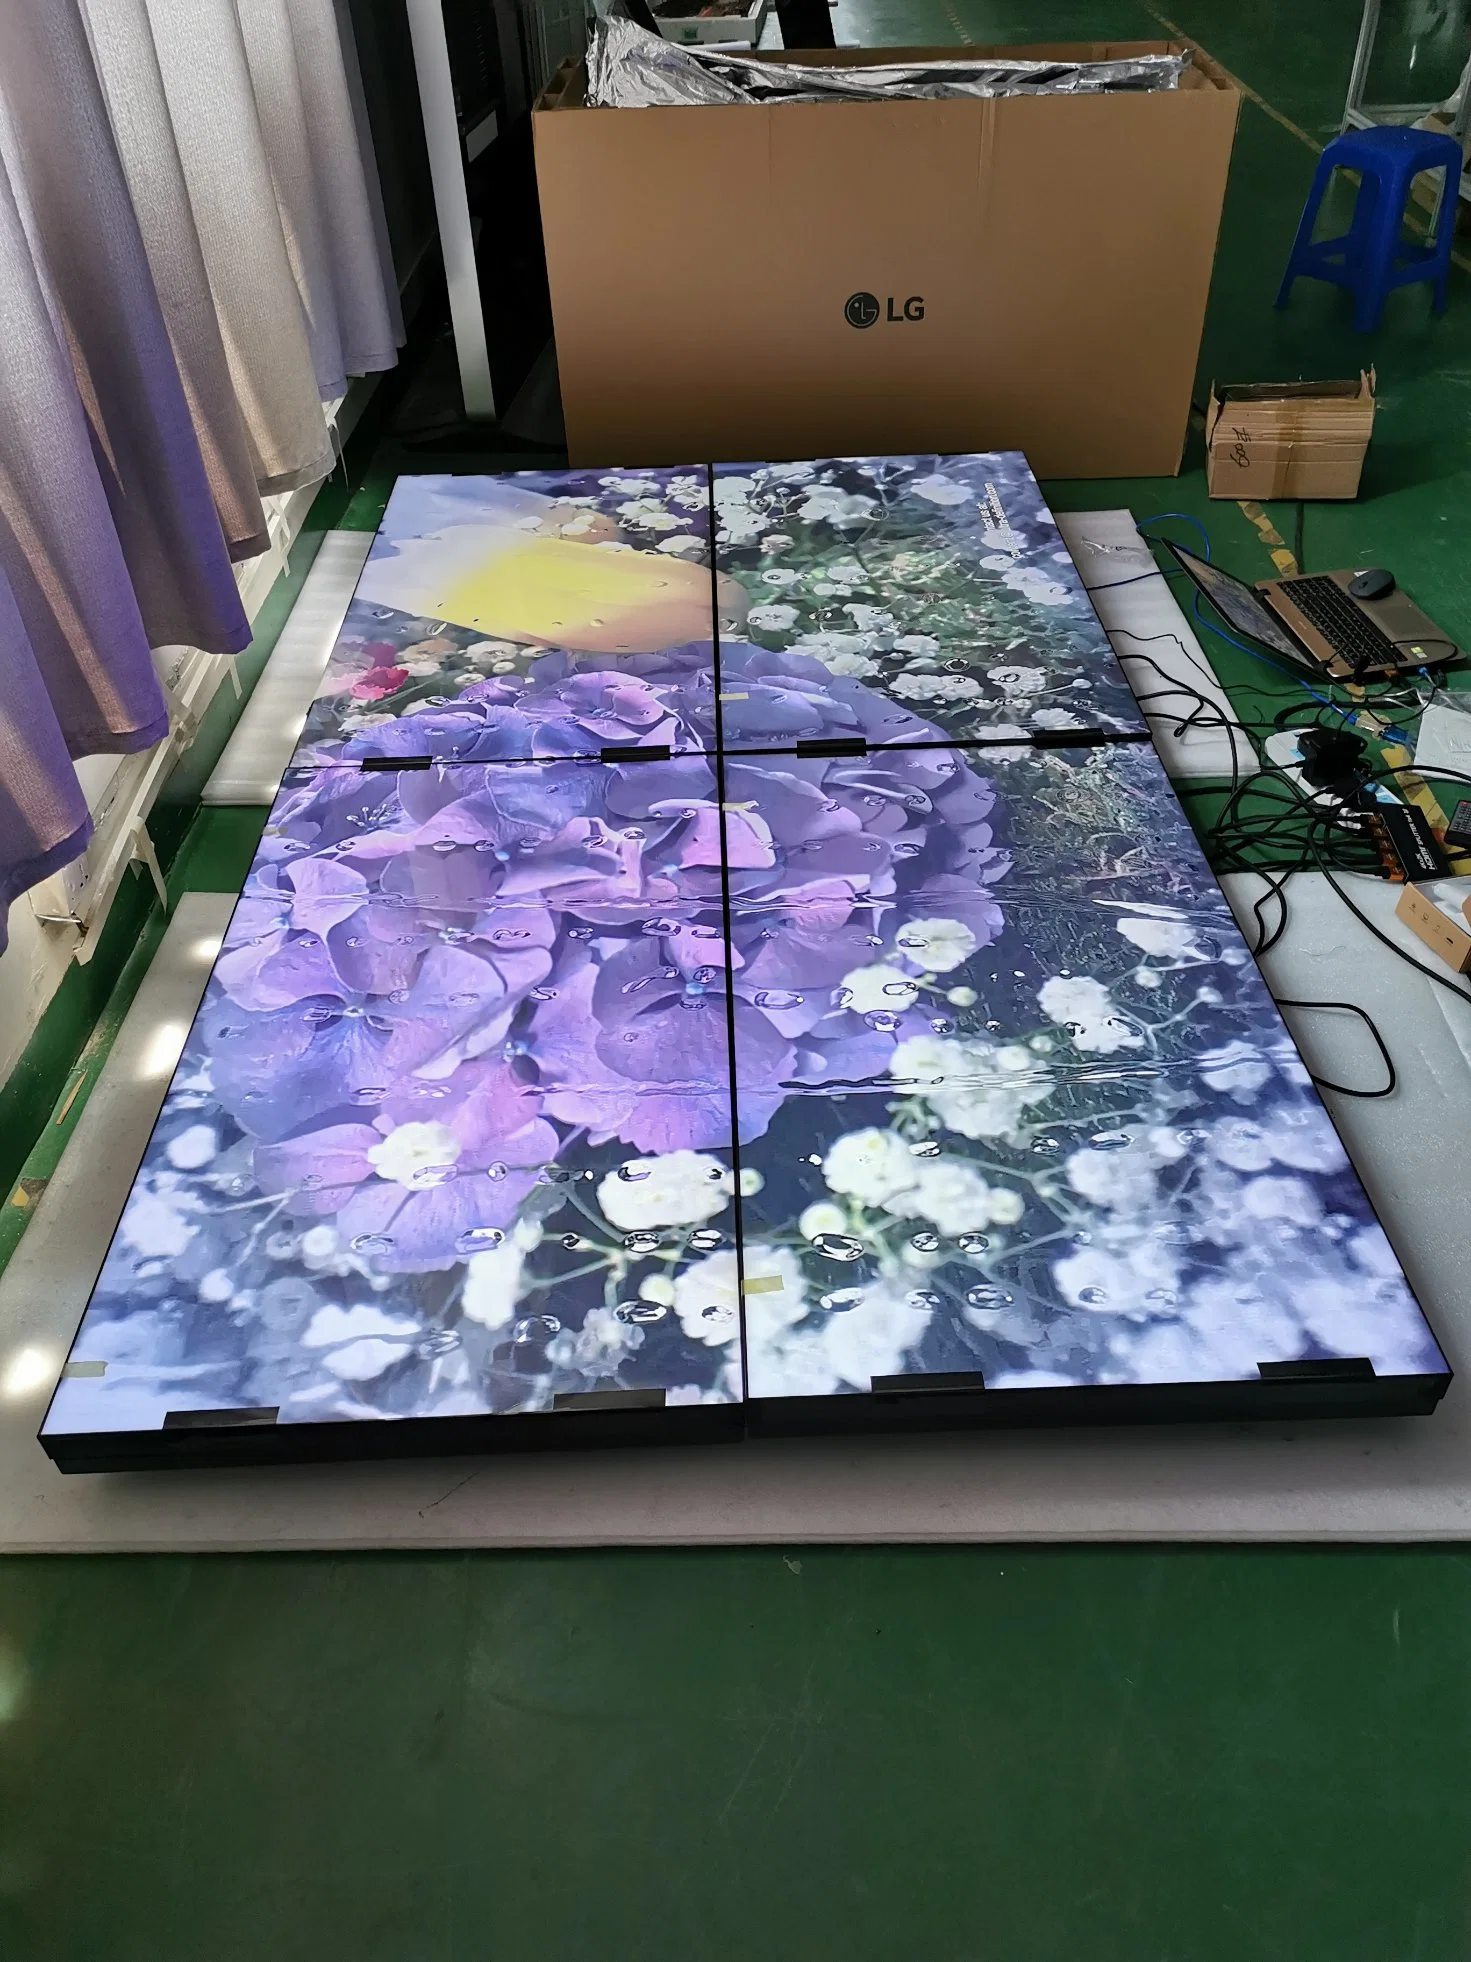 46inch LCD-Display mit LCD-Videowand, schmale Blende